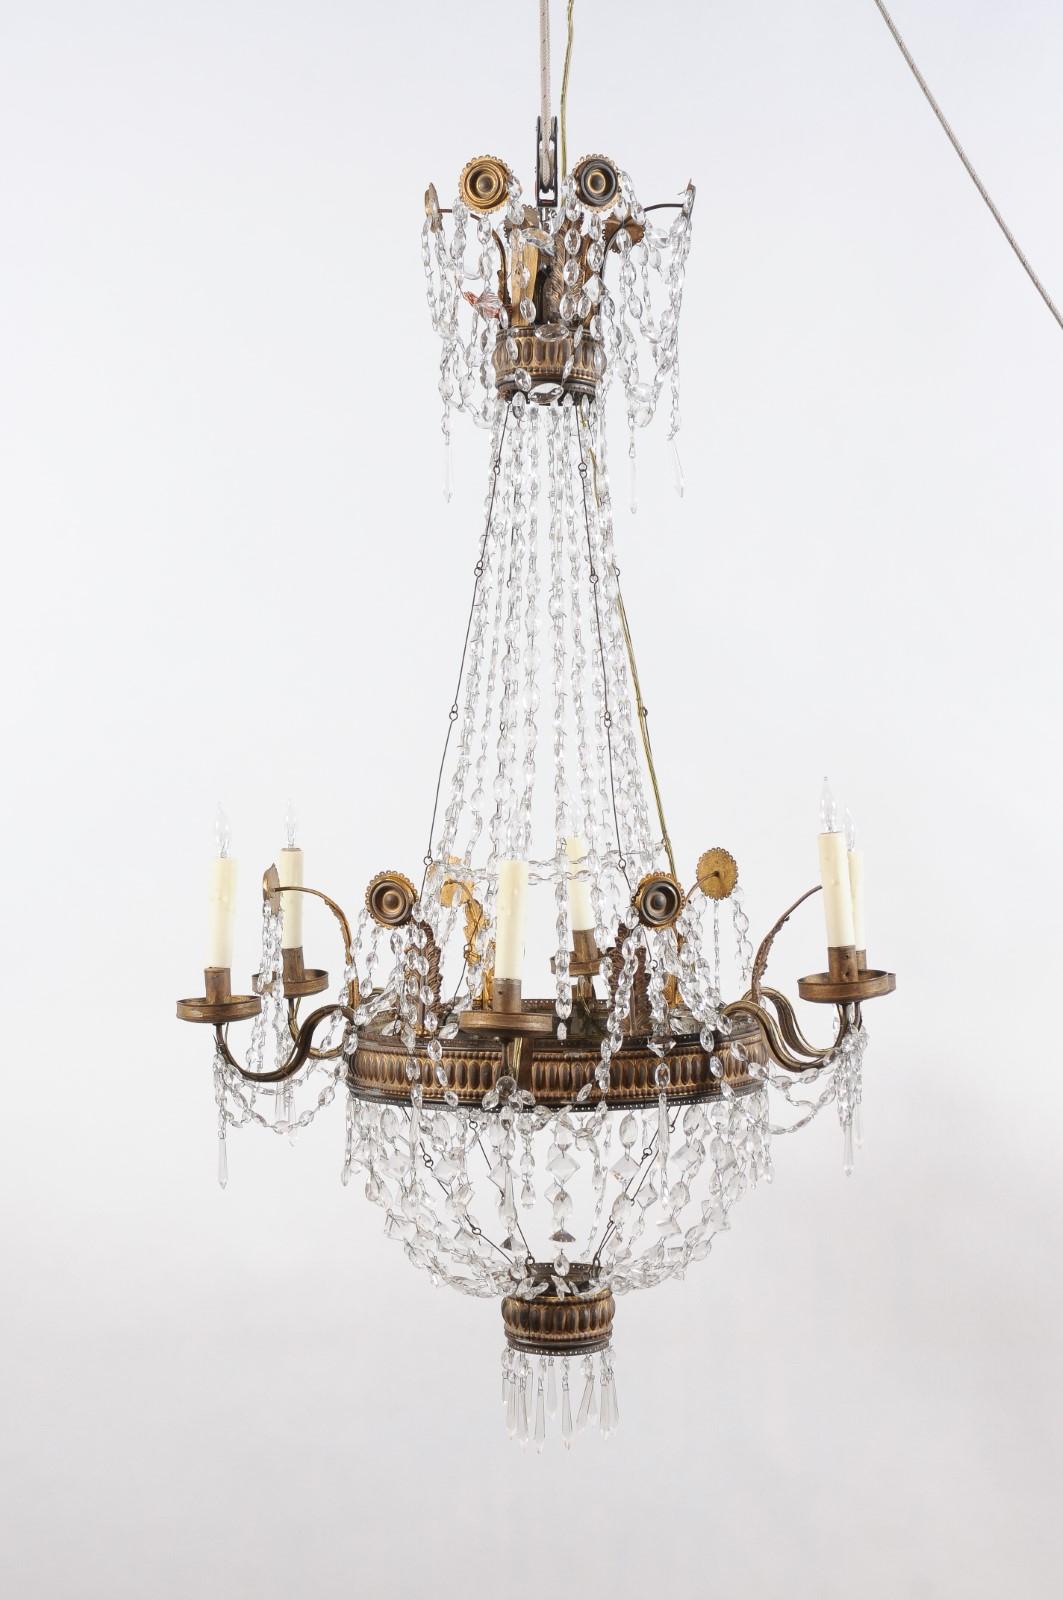 Neoclassical Gilt Metal Chandelier featuring Greek Key Design with Crystal, Italy ca. 1790